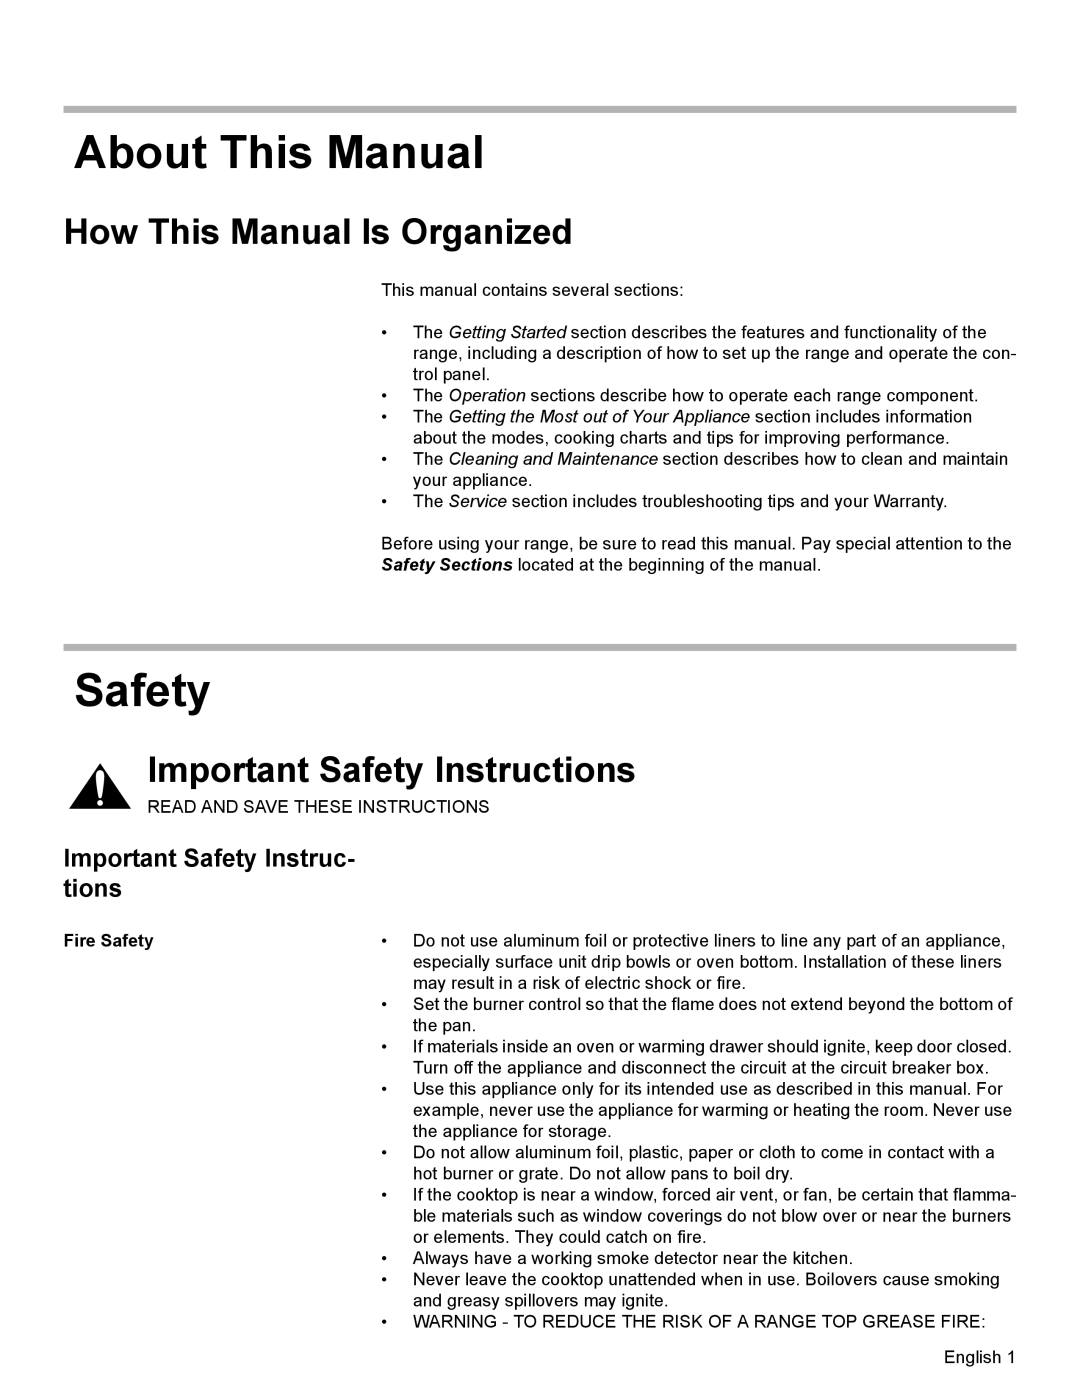 Bosch Appliances HGS7282UC About This Manual, How This Manual Is Organized, Important Safety Instructions, Fire Safety 